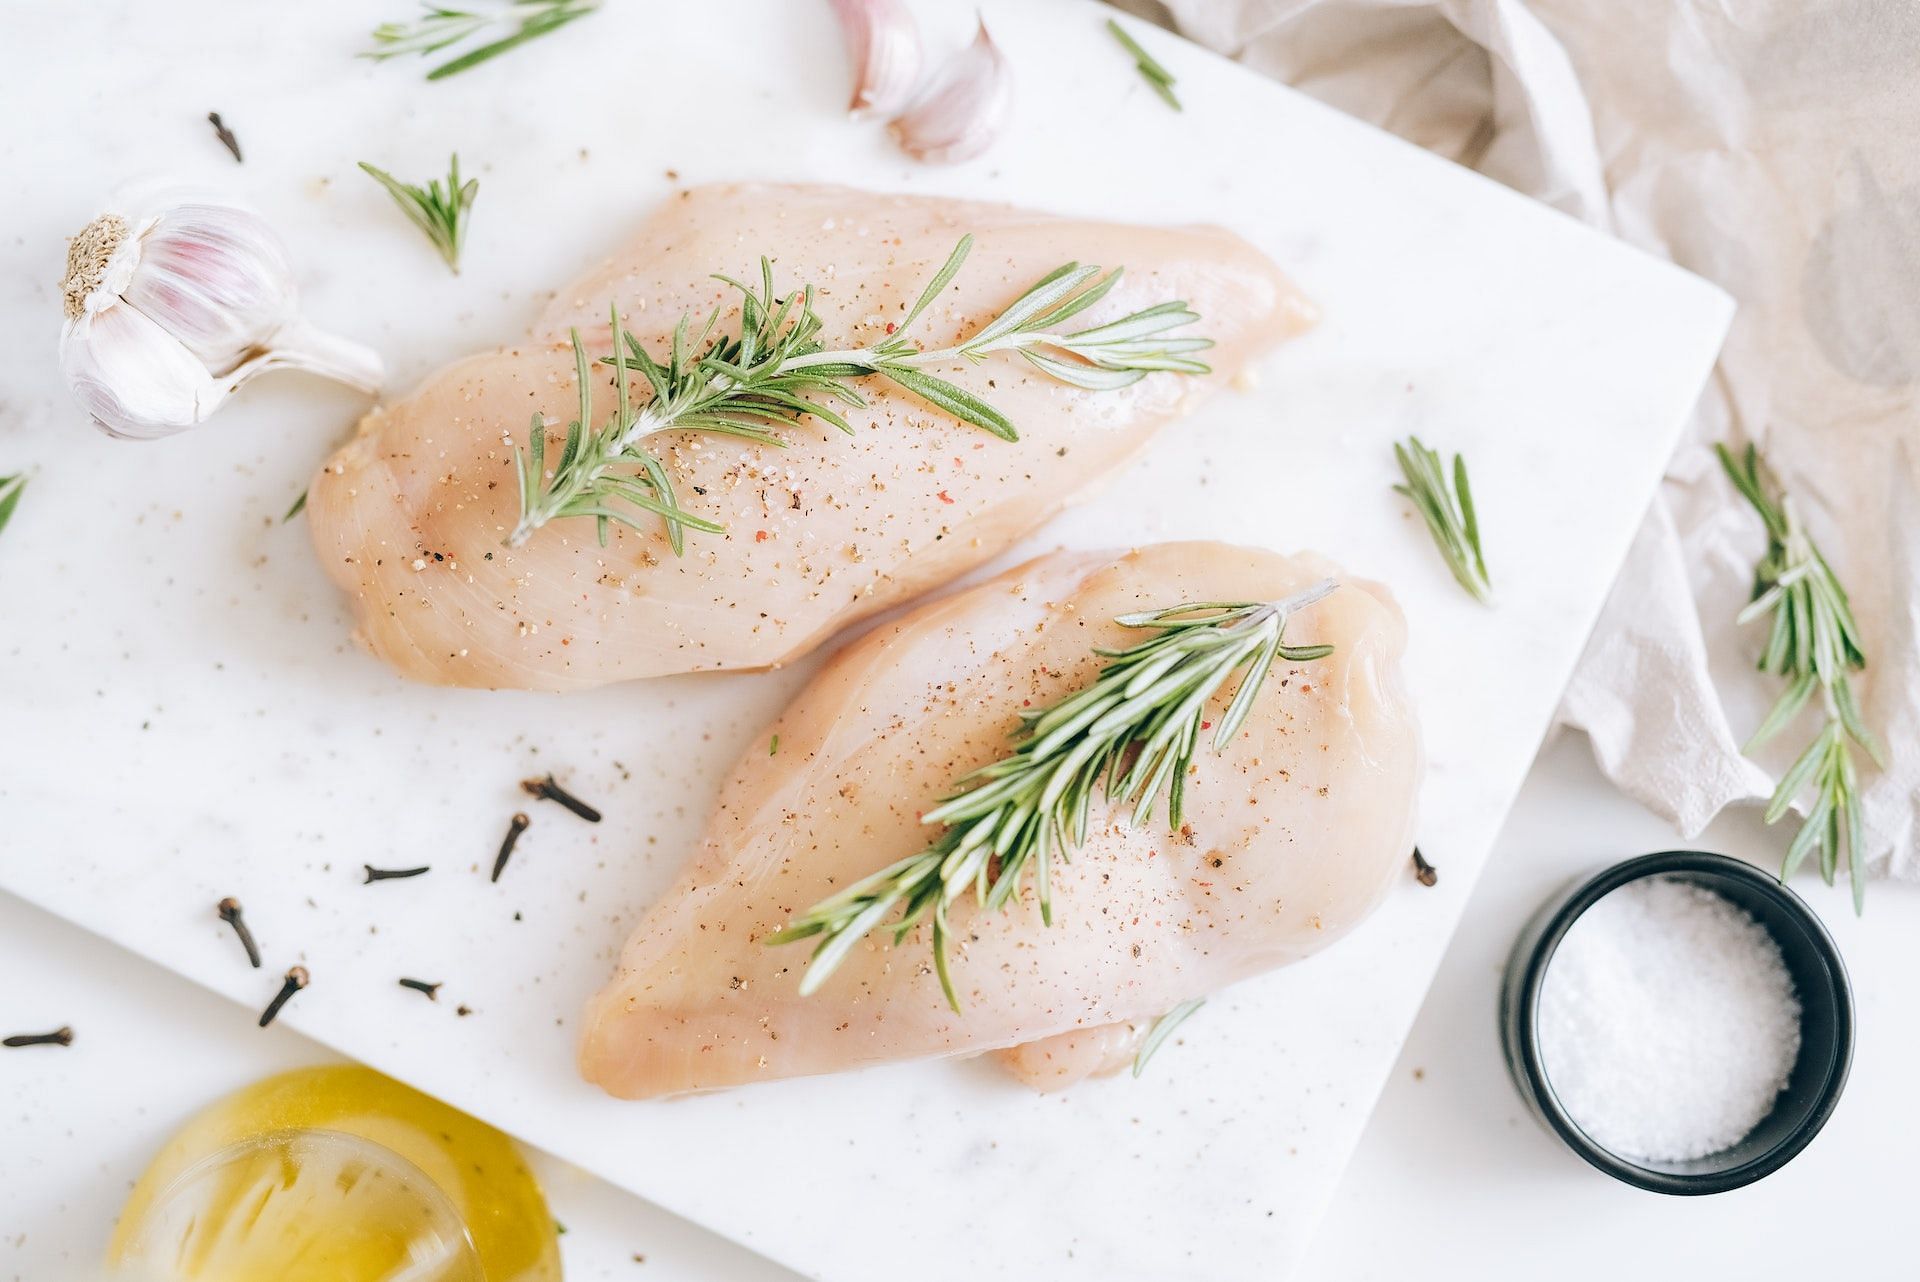 Chicken breasts are a good source of lean protein. (Photo via Pexels/Leeloo Thefirst)